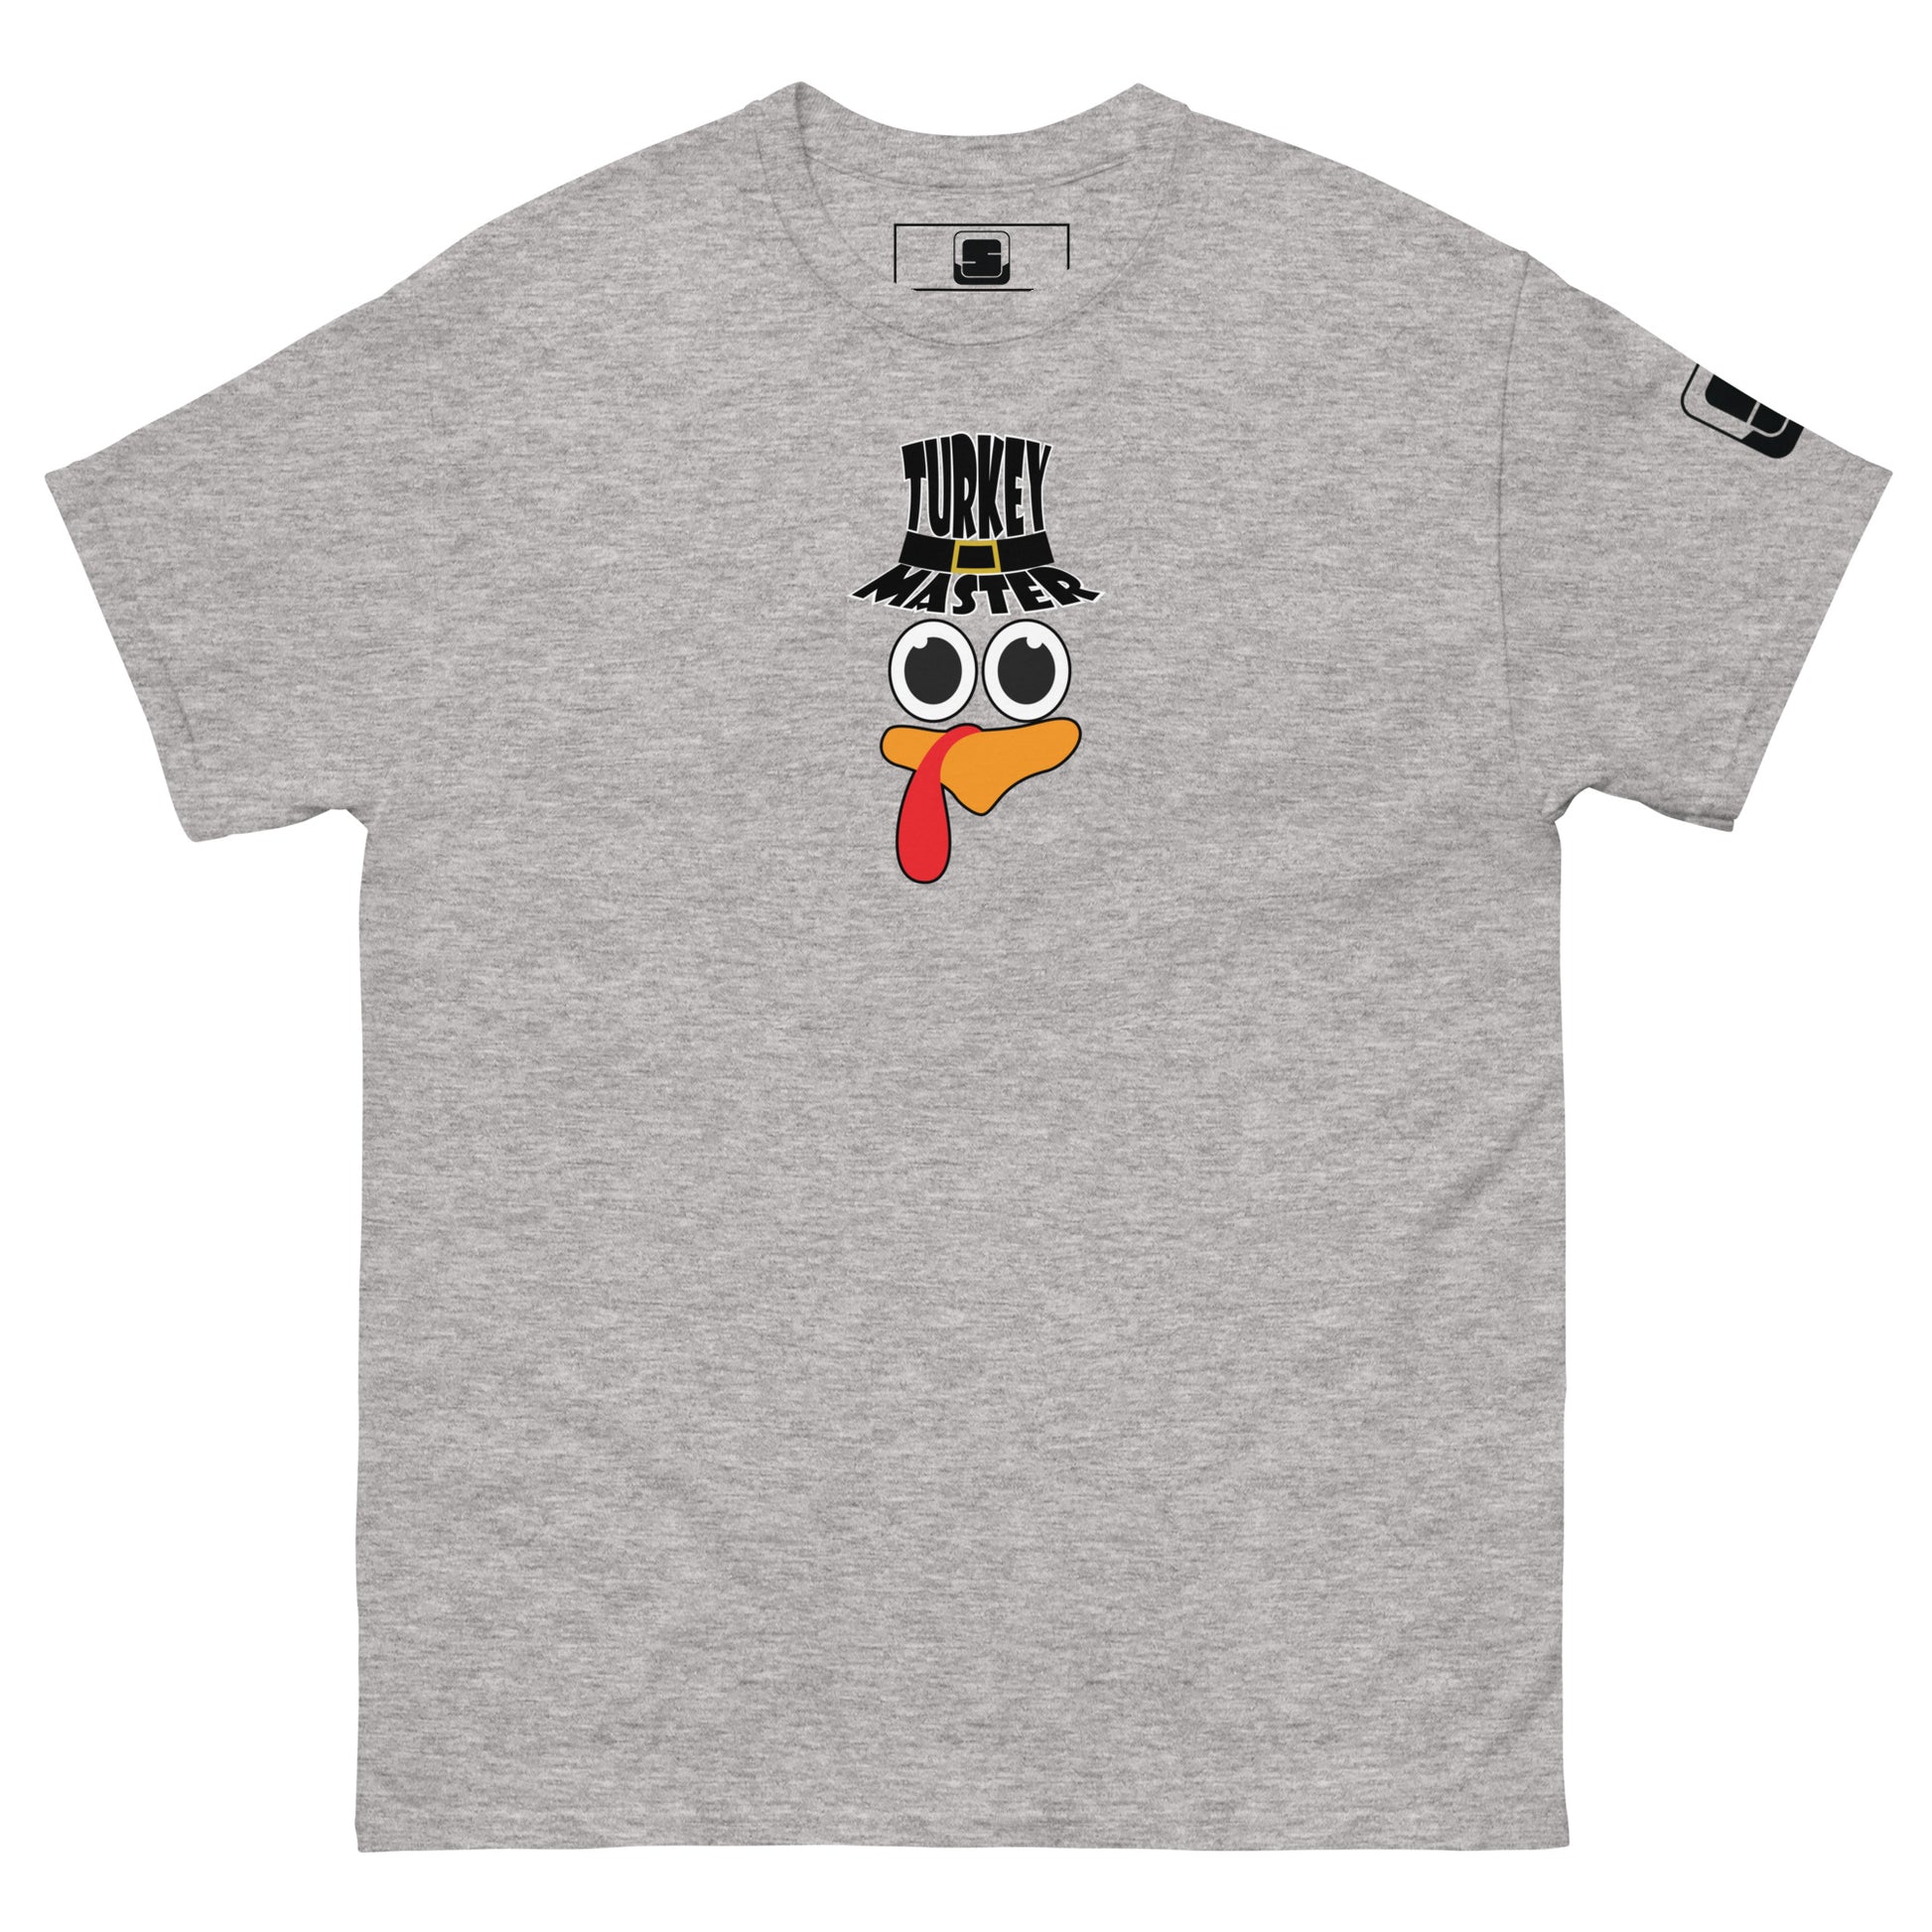 A light grey t-shirt featuring a playful graphic design of a turkey face with eyes, an orange beak, and a red snood. Above the face, the text reads "TURKEY MASTER" in bold, stylized letters. The text is in the shape of a pilgrims hat. On the left sleeve, there's a rectangular logo patch, adding a unique touch. The shirt is laid out flat, showcasing the entire design clearly.